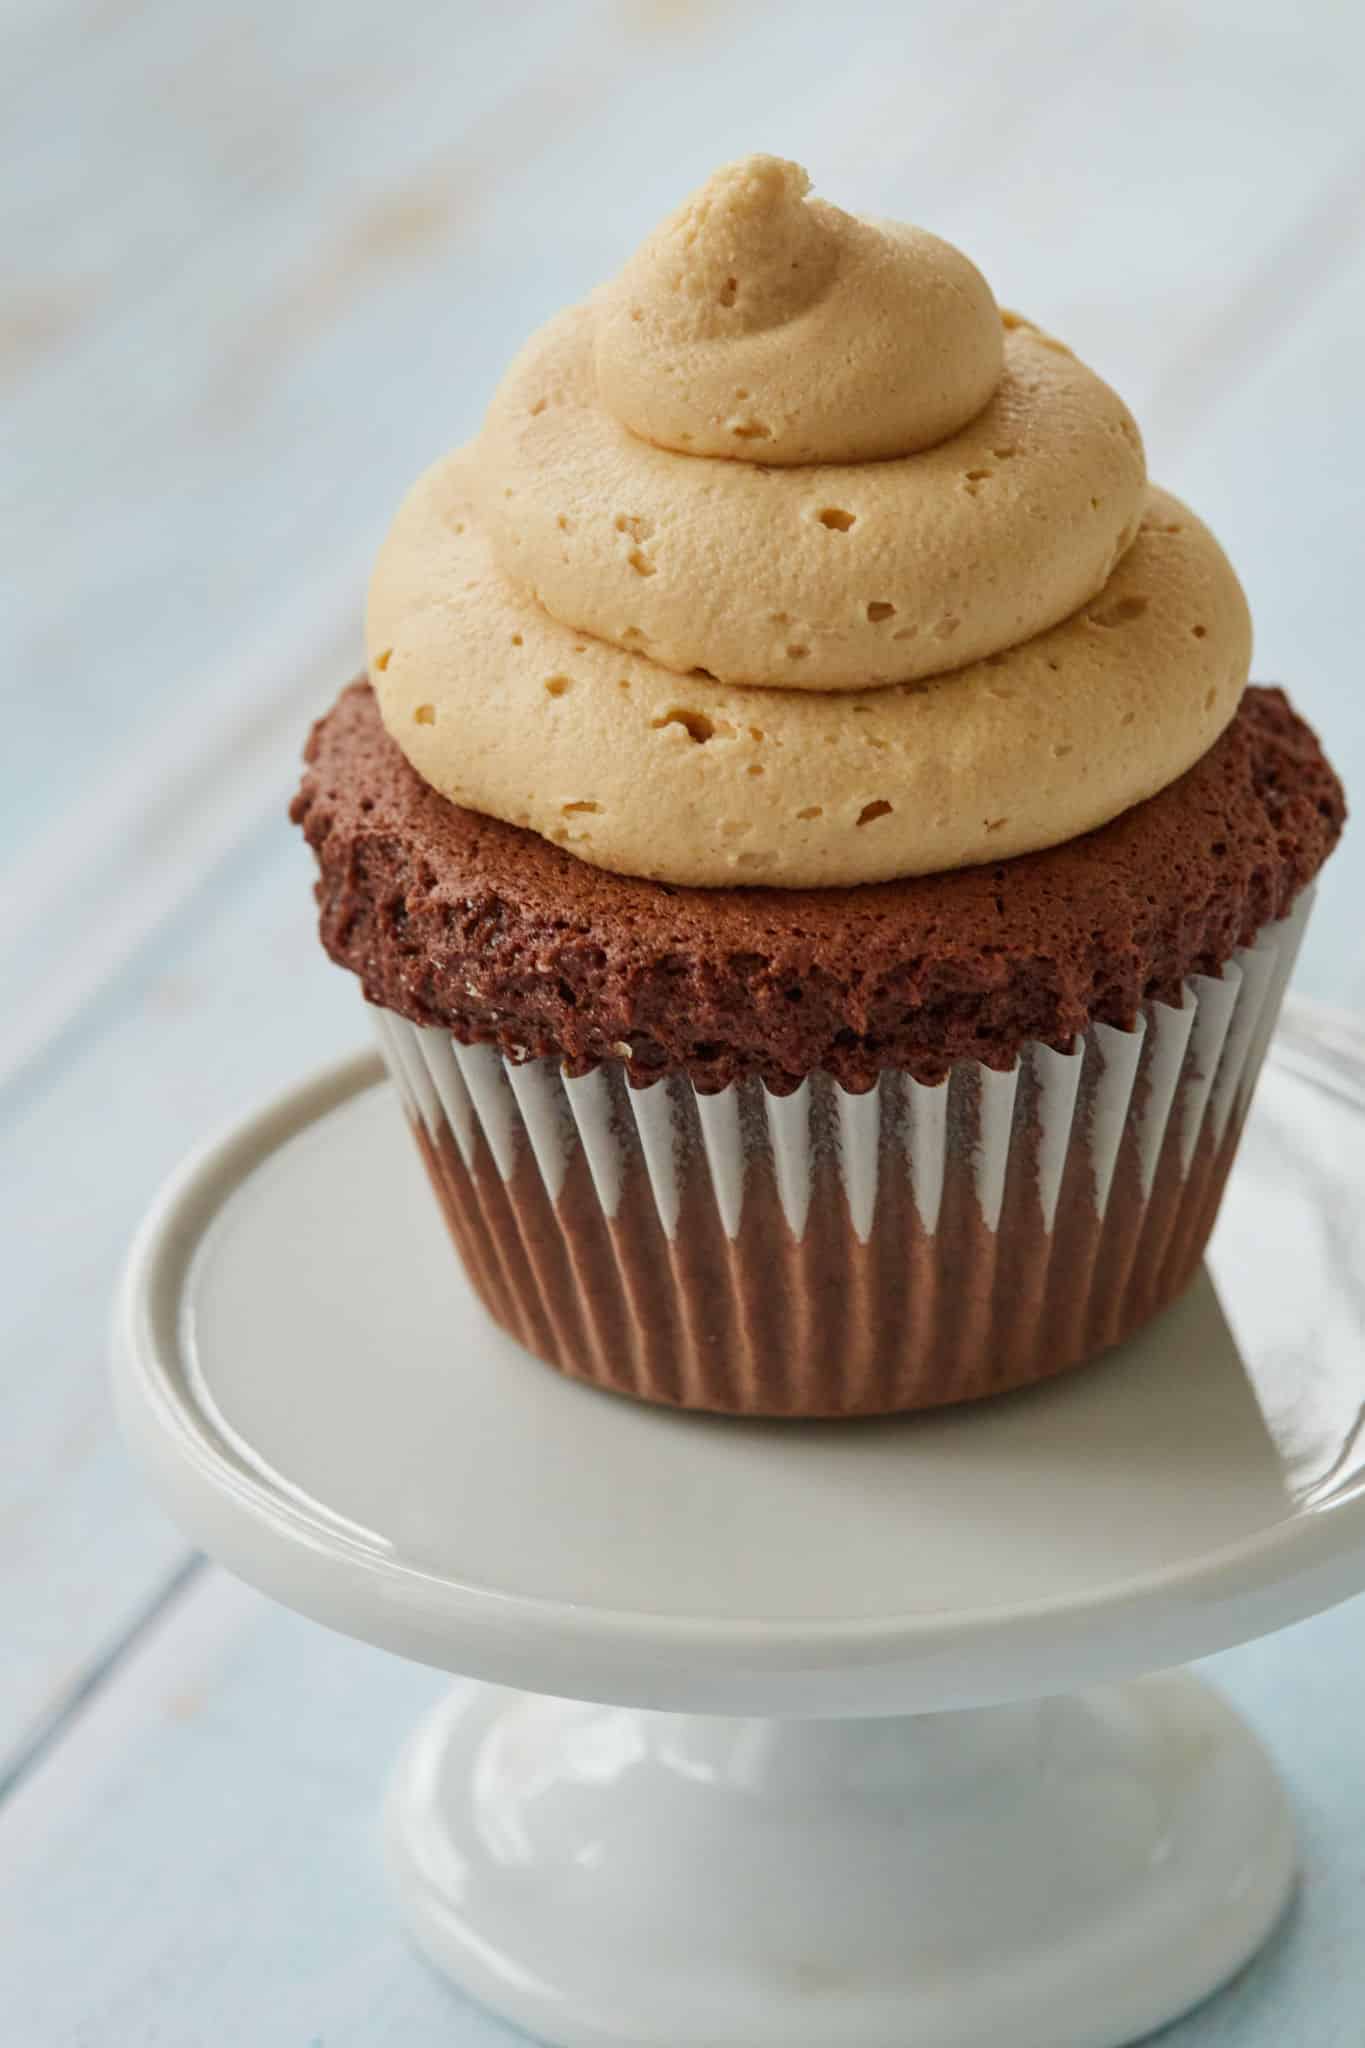 A cupcake topped with peanut butter frosting.